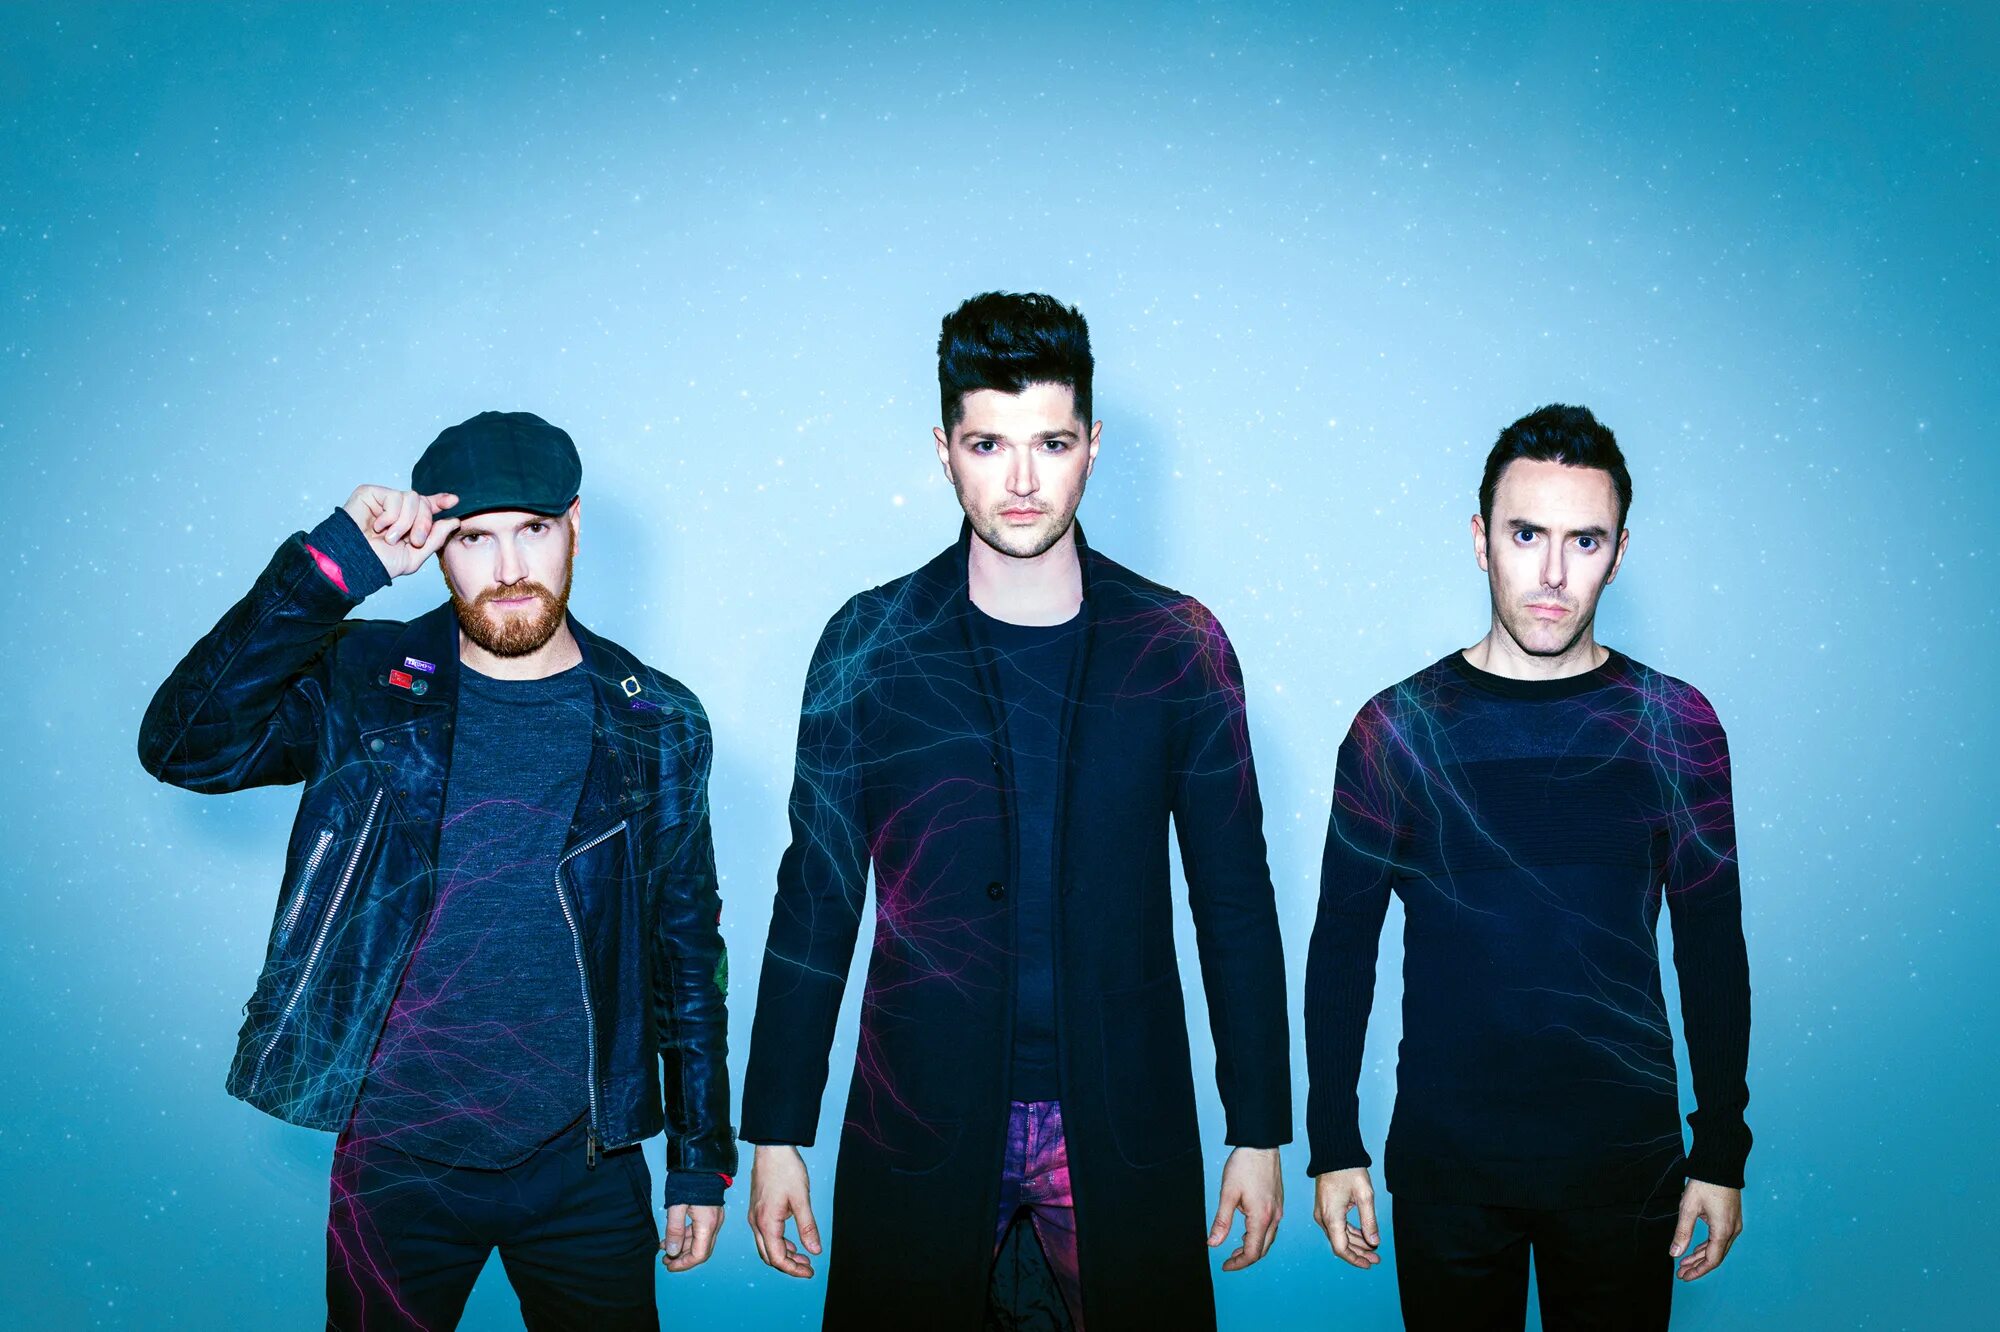 The script if you could. Script. The script Band. The script фото. The script Rain.